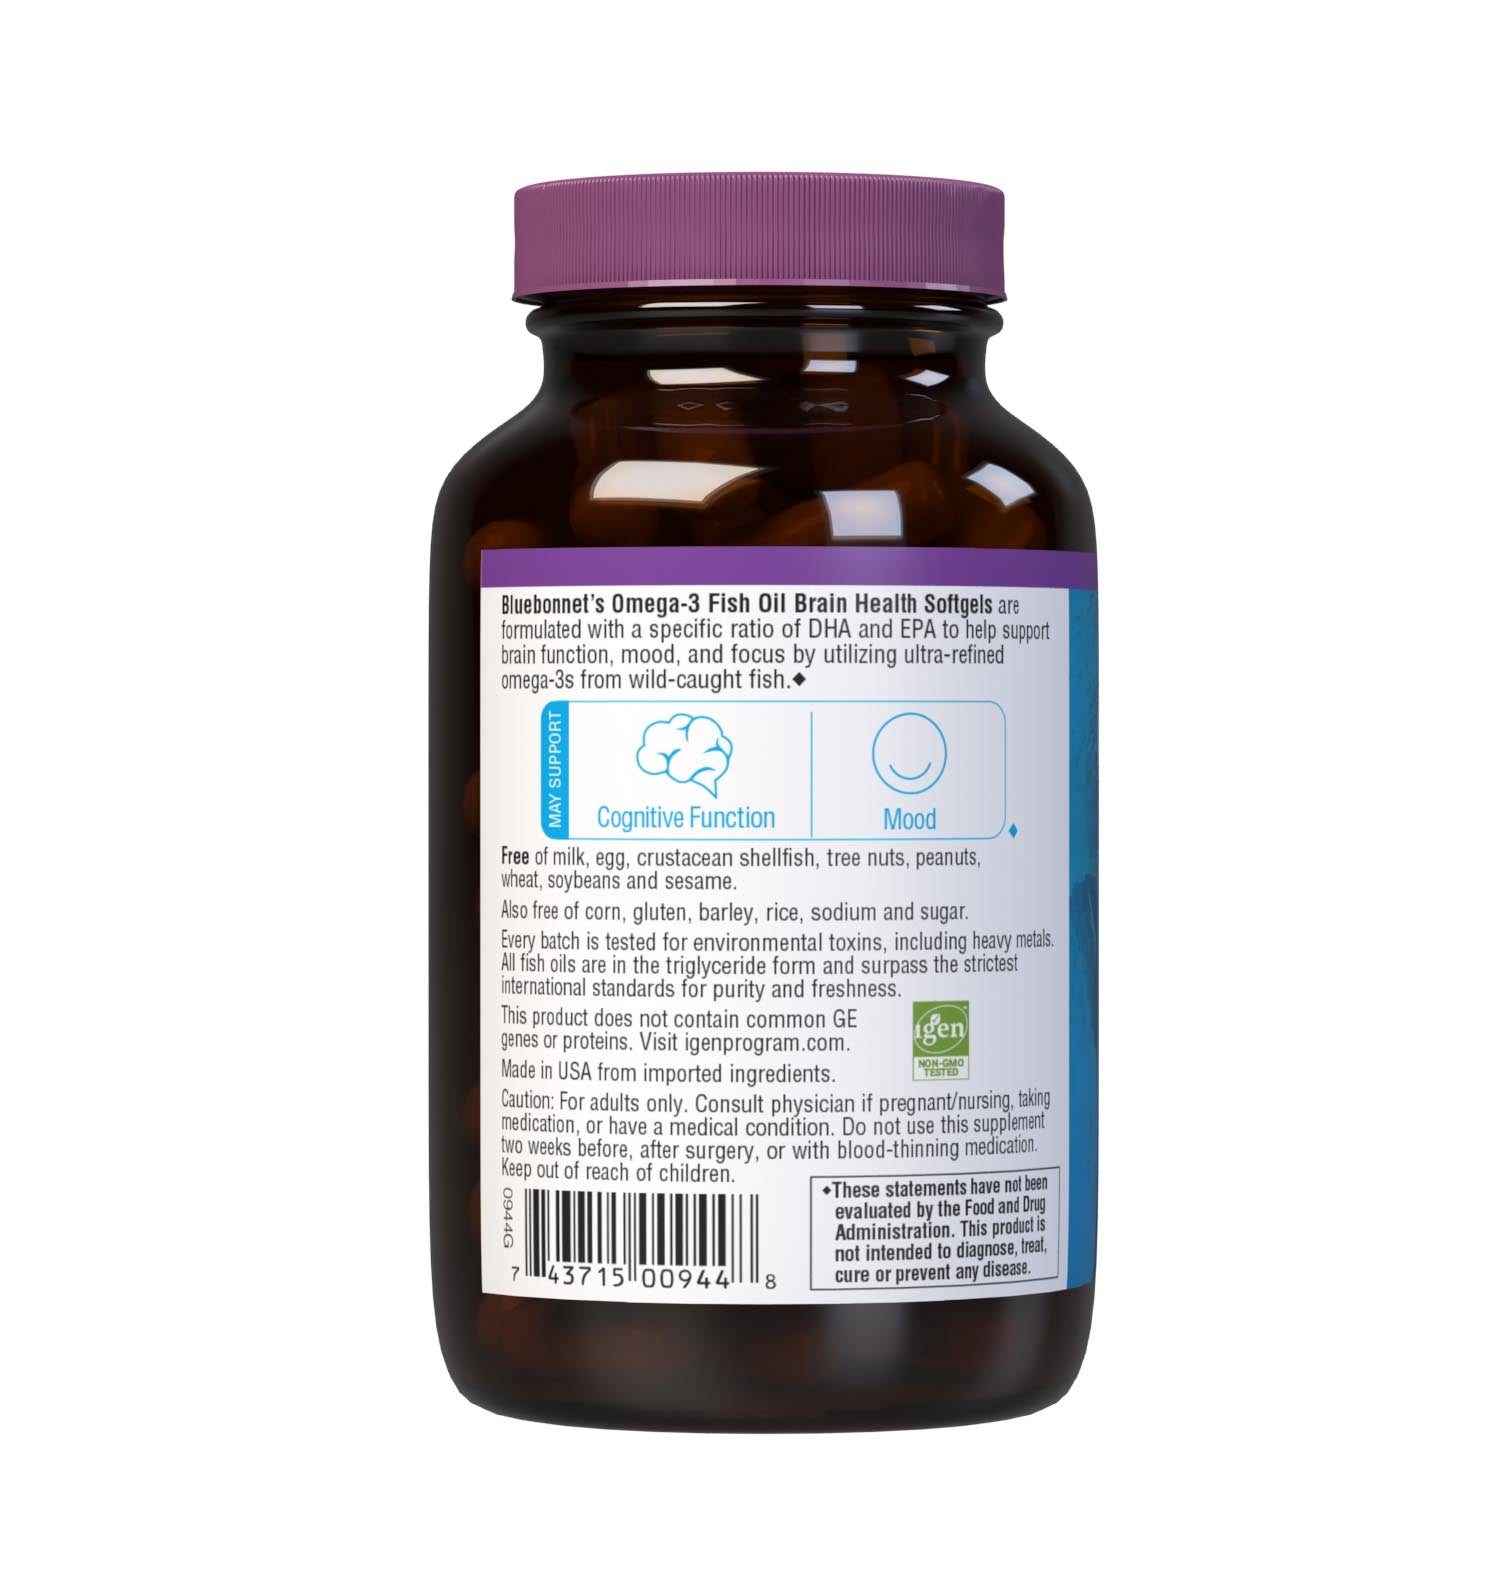 Bluebonnet’s Omega-3 Fish Oil Brain Health 60 Softgels are formulated with a specific ratio of DHA and EPA to help support brain function, mood, and focus by utilizing ultra-refined omega-3s from wild-caught fish. Description panel. #size_60 count